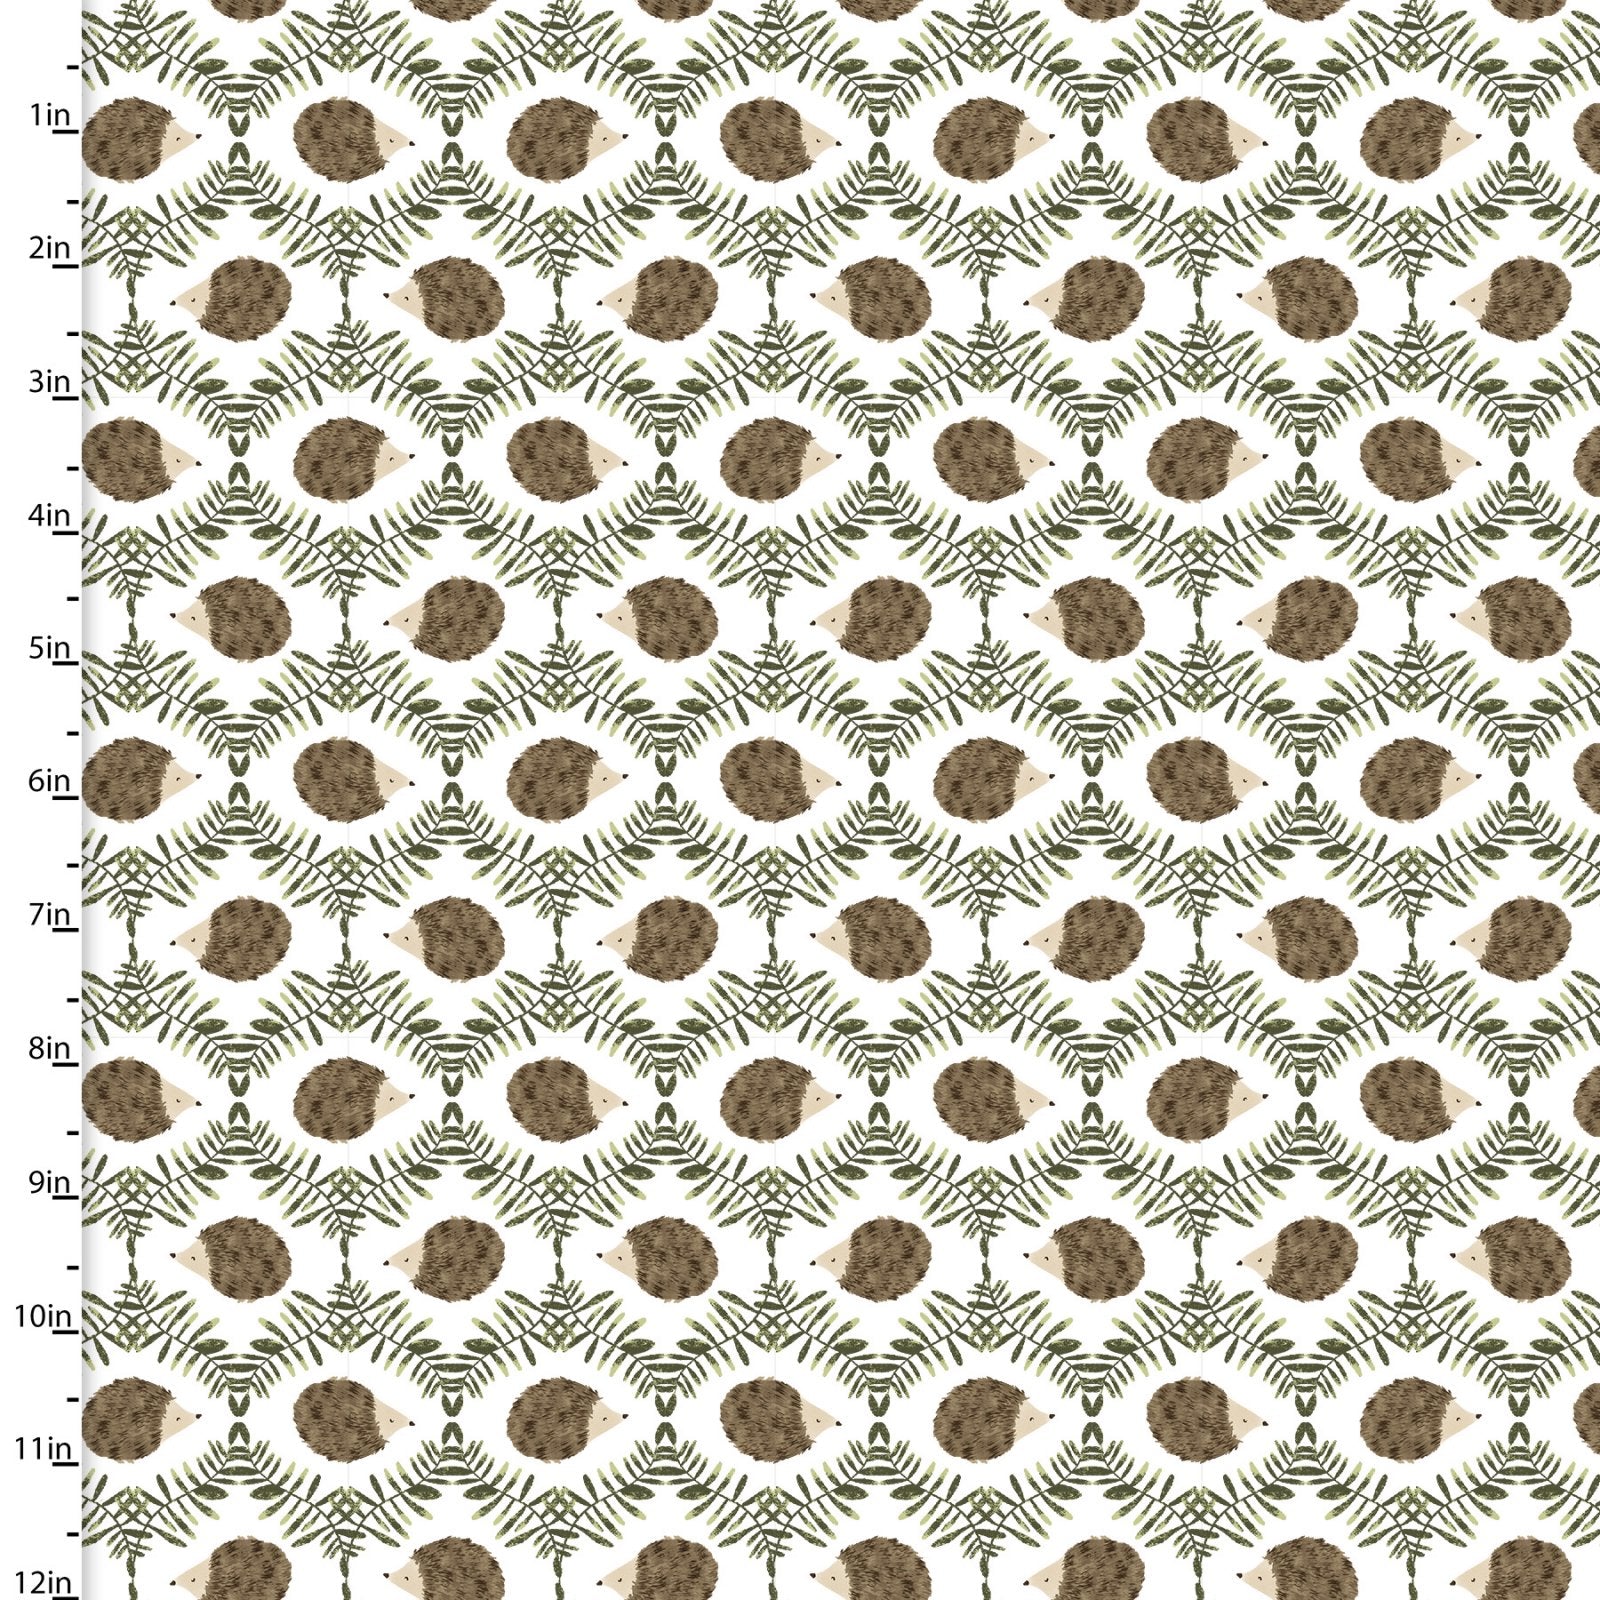 Hedgehogs in rows surrounded by leaves on white cotton fabric - You light my way gnome by 3 Wishes